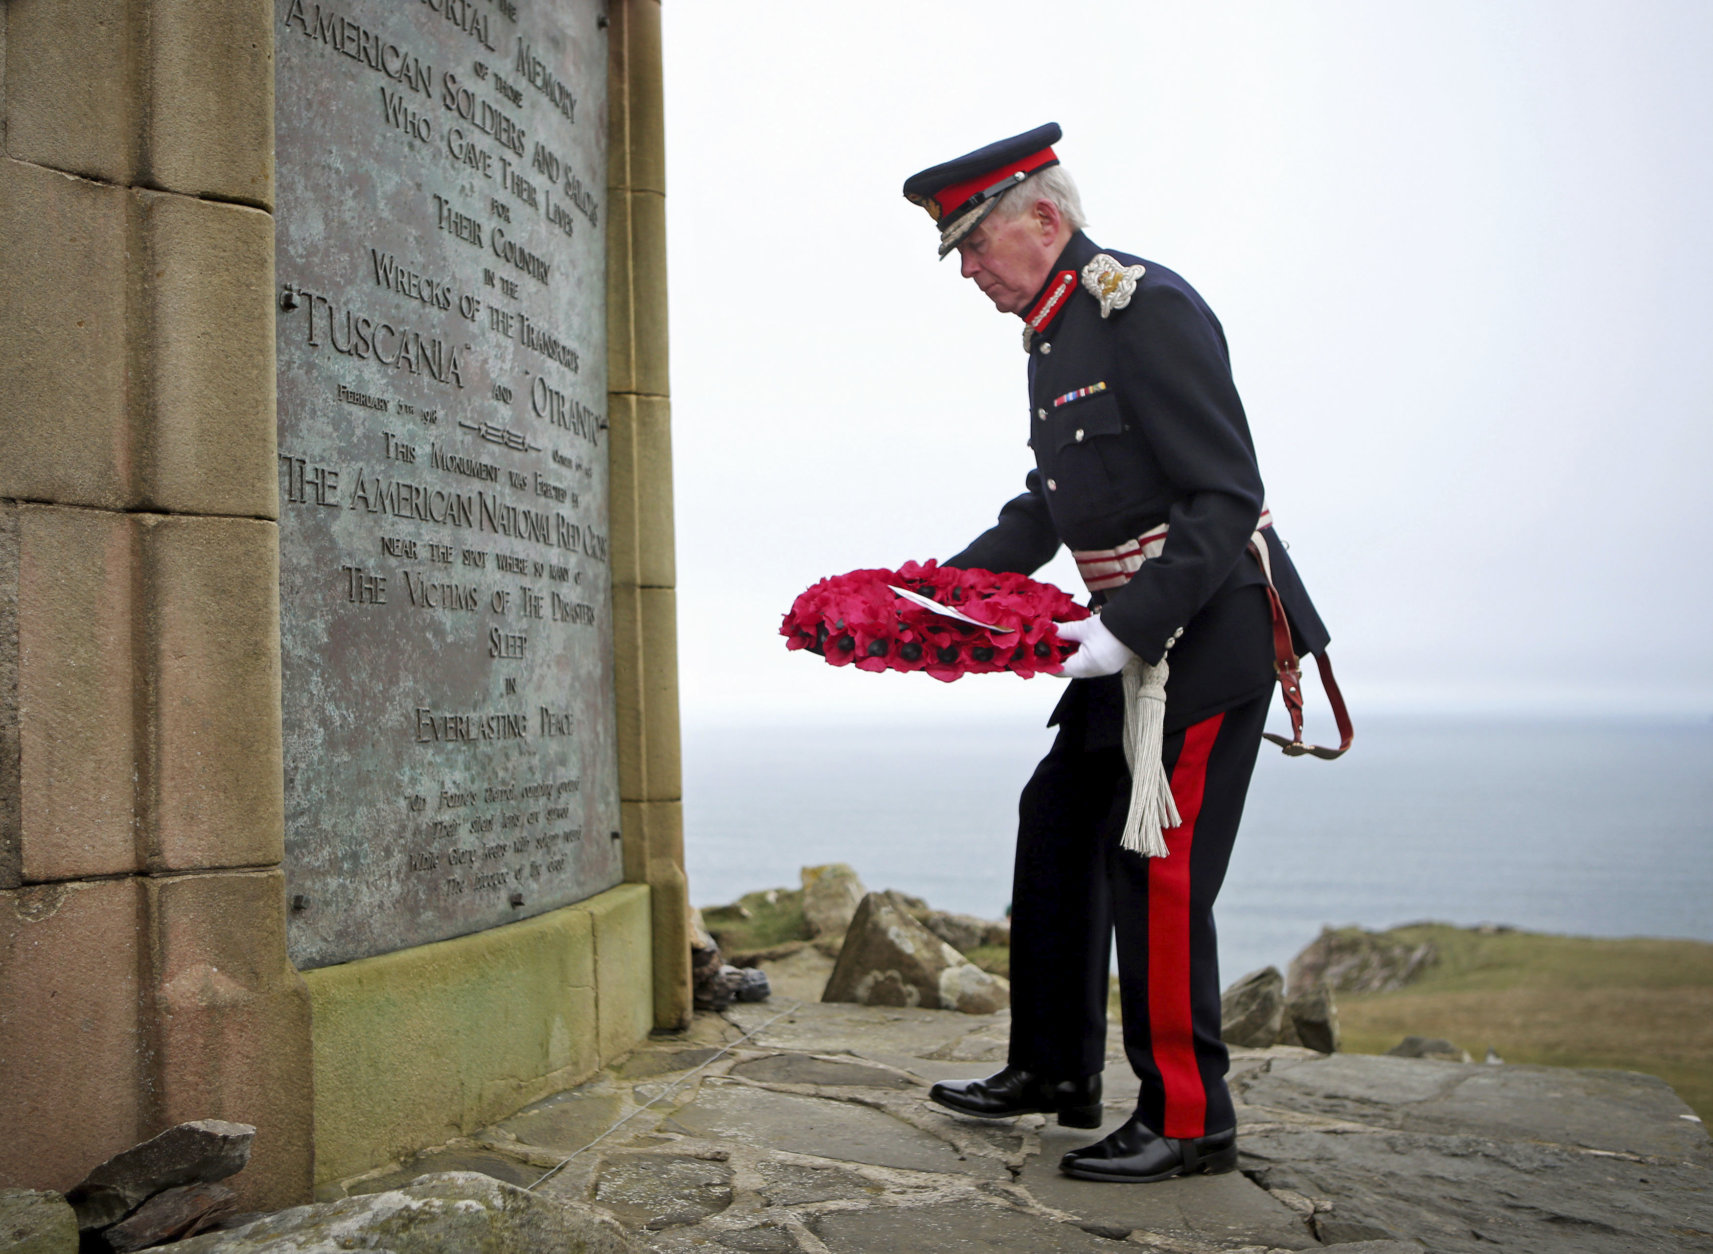 Lord Lieutenant of Argyll and Bute, Patrick Stewart, lays a wreath during a service at the American Moment at the Mull of Oa on Islay, Scotland, Friday May 4, 2018. Relatives of U.S. soldiers who died in two sea disasters off the coast of Scotland during World War I have traveled to the island of Islay for a service honoring those who were lost and the local people who rescued the survivors. The ceremony commemorates the sinking of two troop carriers, the SS Tuscania in February 1918 and the HMS Otranto eight months later, where some 700 U.S. servicemen and British crew members lost their lives. (Jane Barlow/PA via AP)